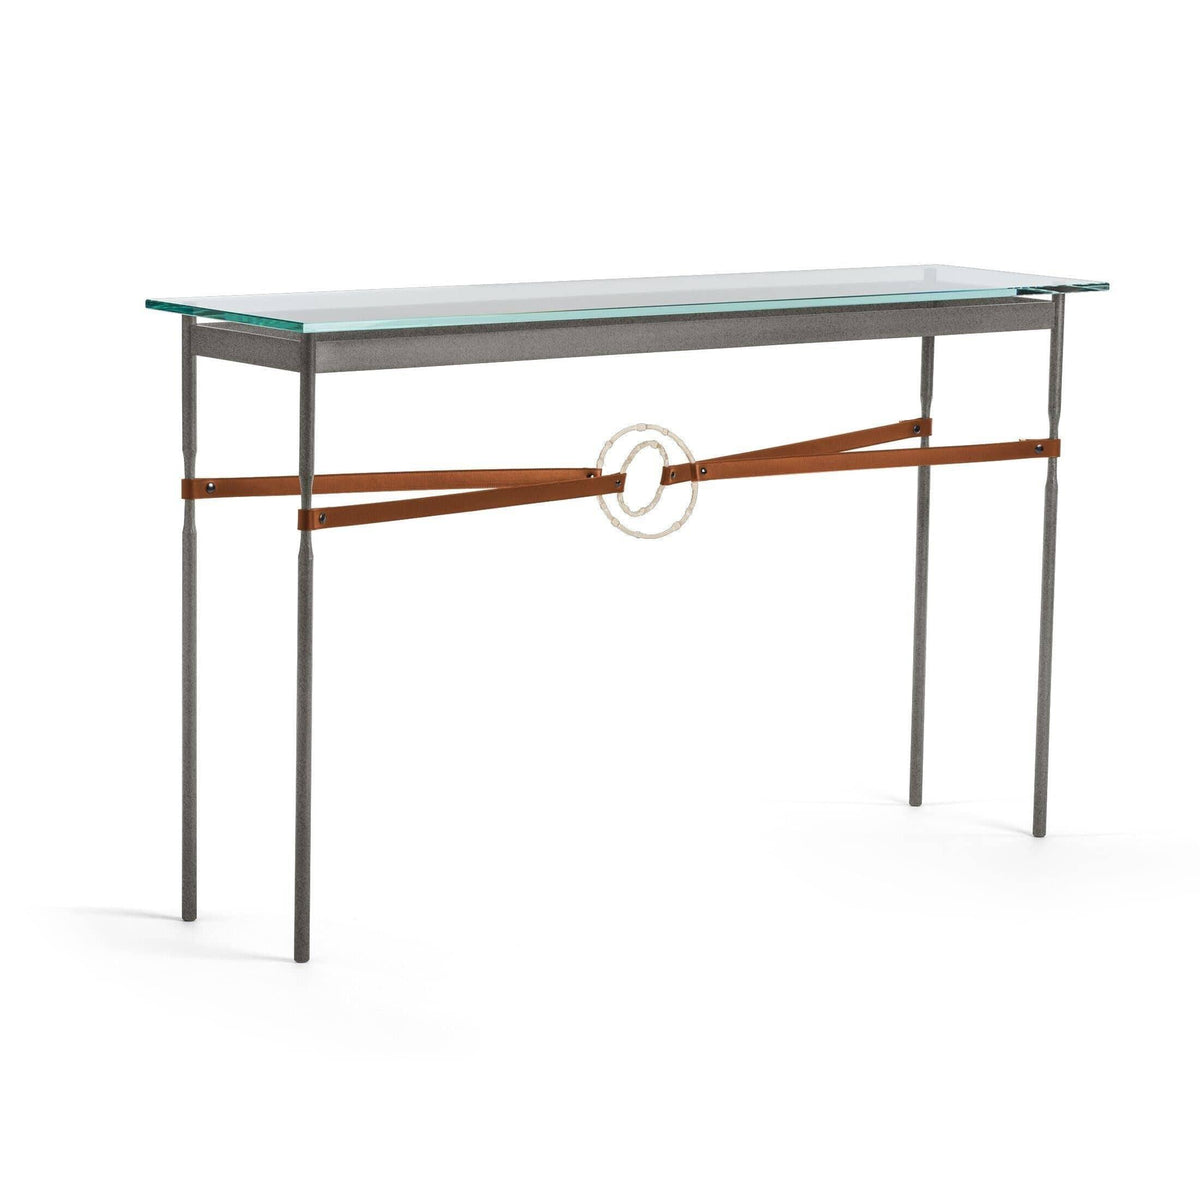 Hubbardton Forge - Equus Chestnut Leather Console Table - 750118-20-84-LC-VA0714 | Montreal Lighting & Hardware